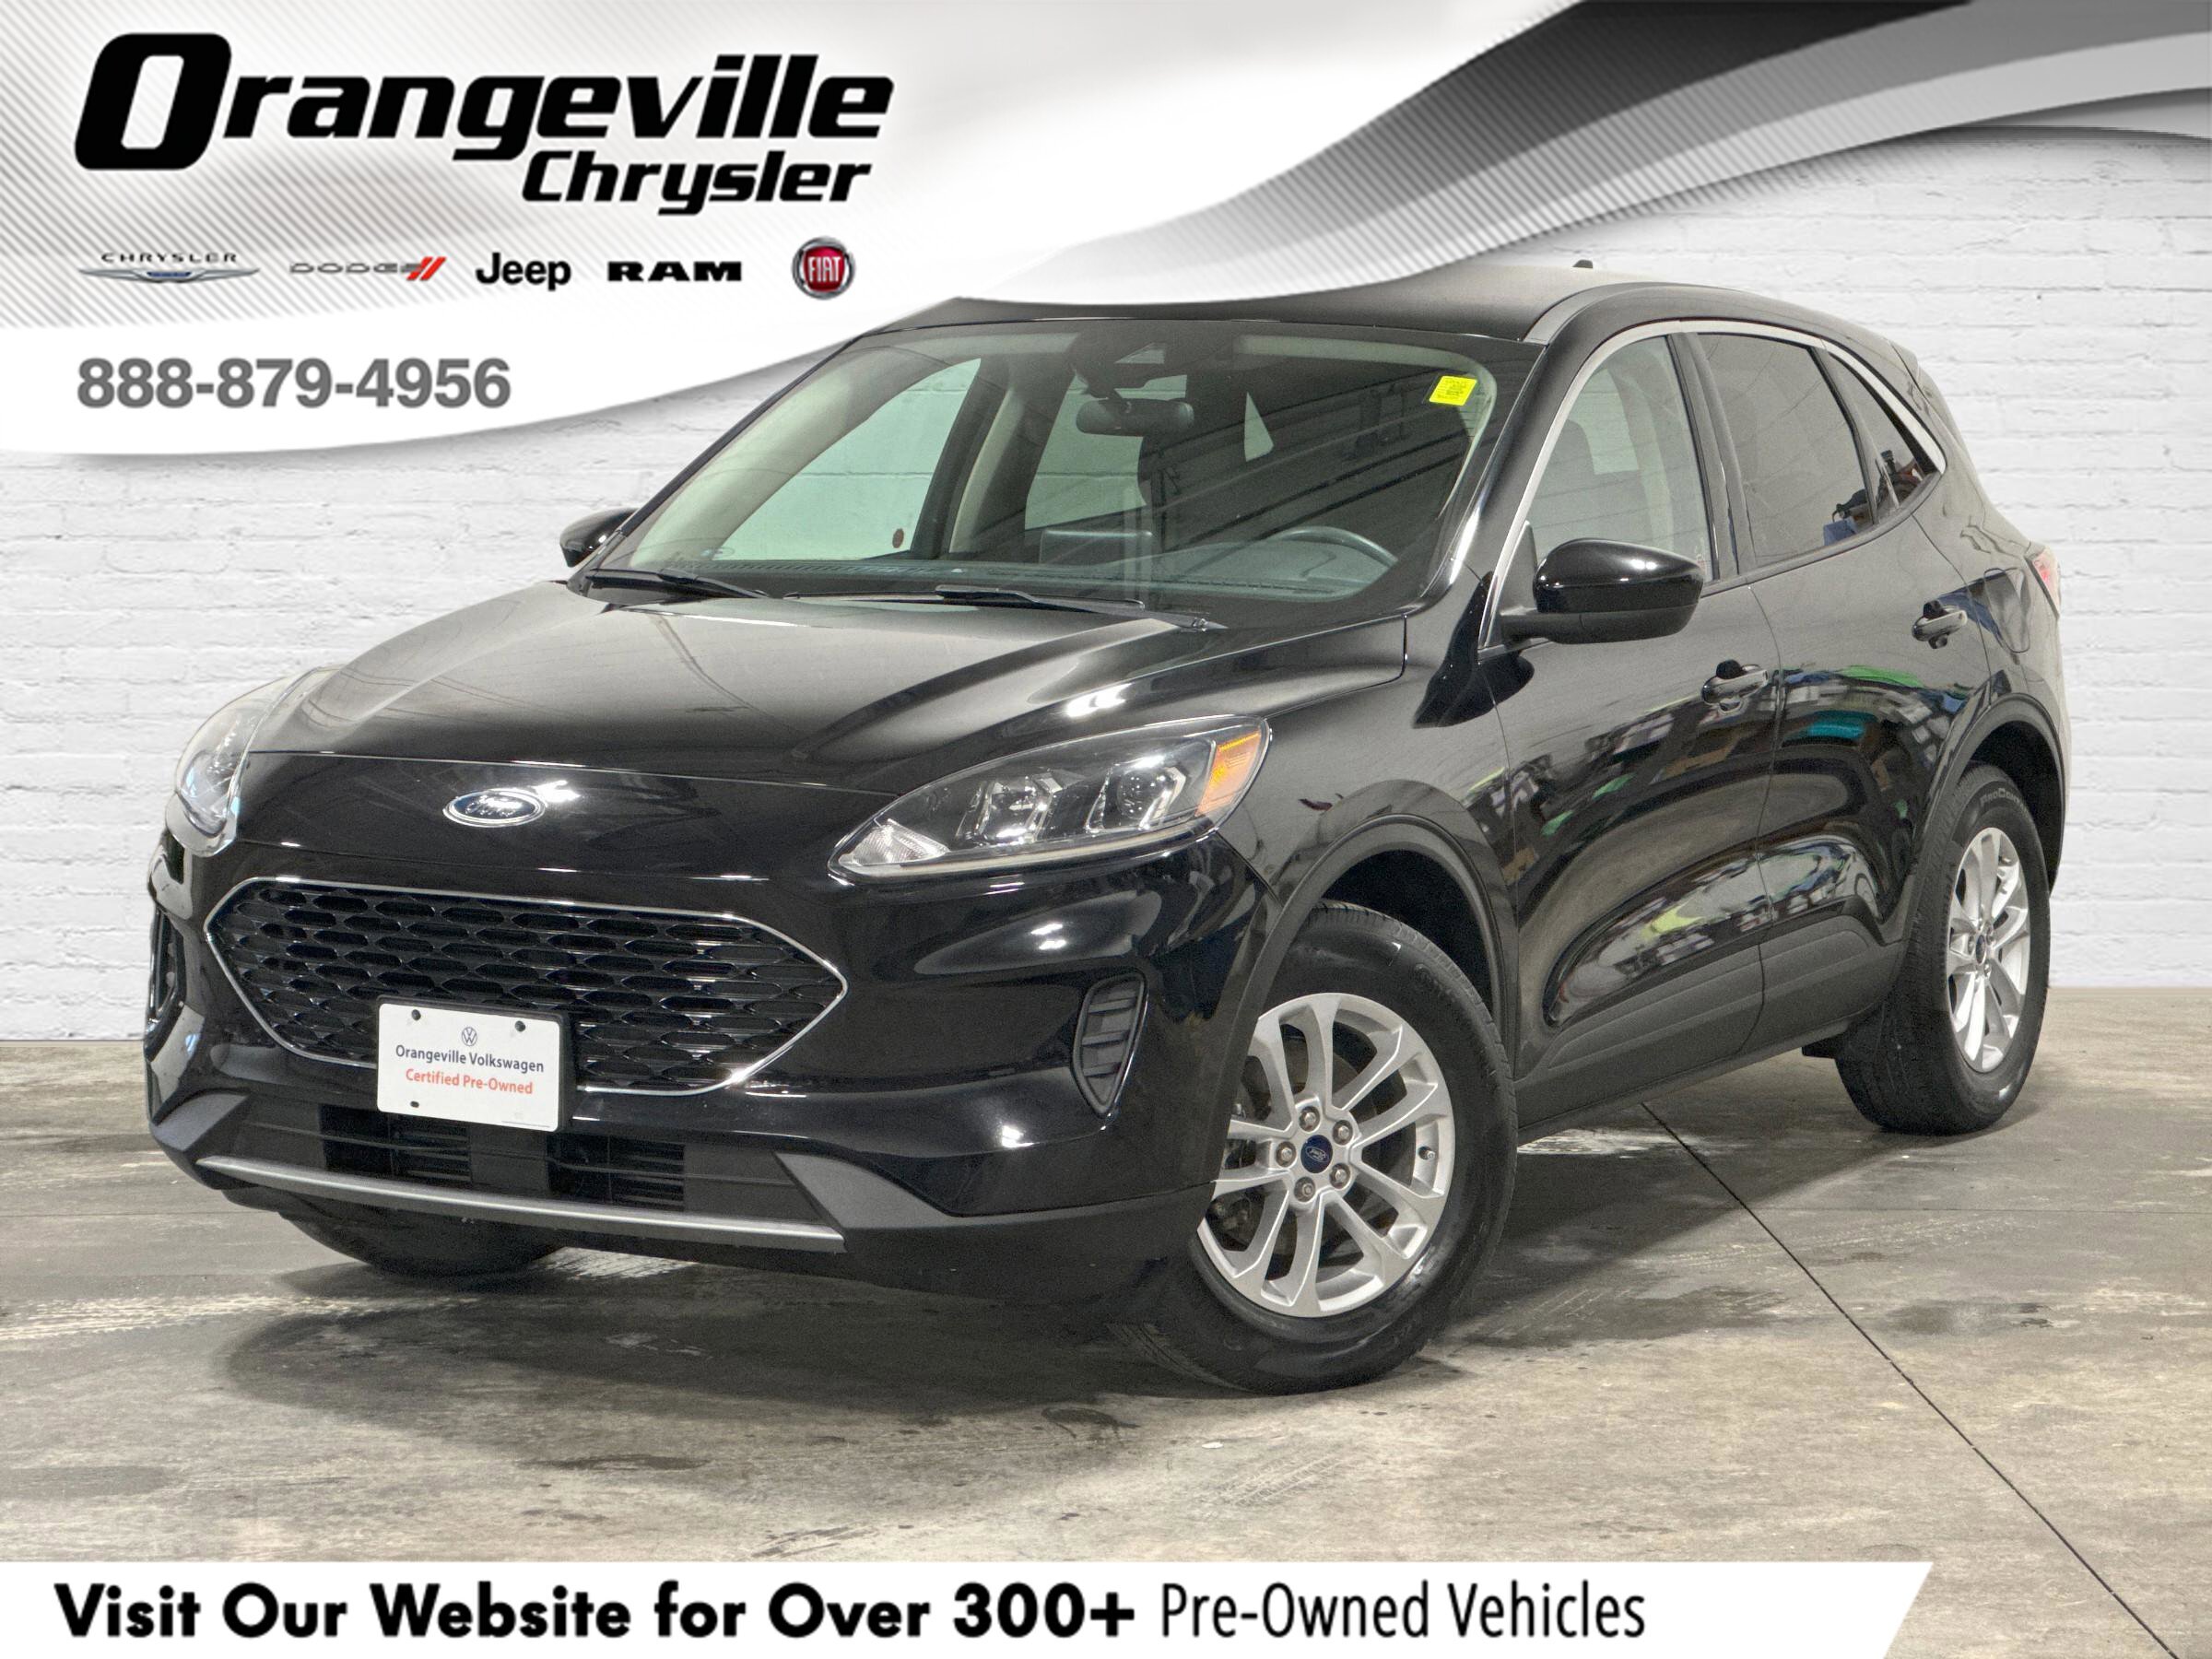 2020 Ford Escape SEAWD, HEATED SEATS, WINTER TIRES